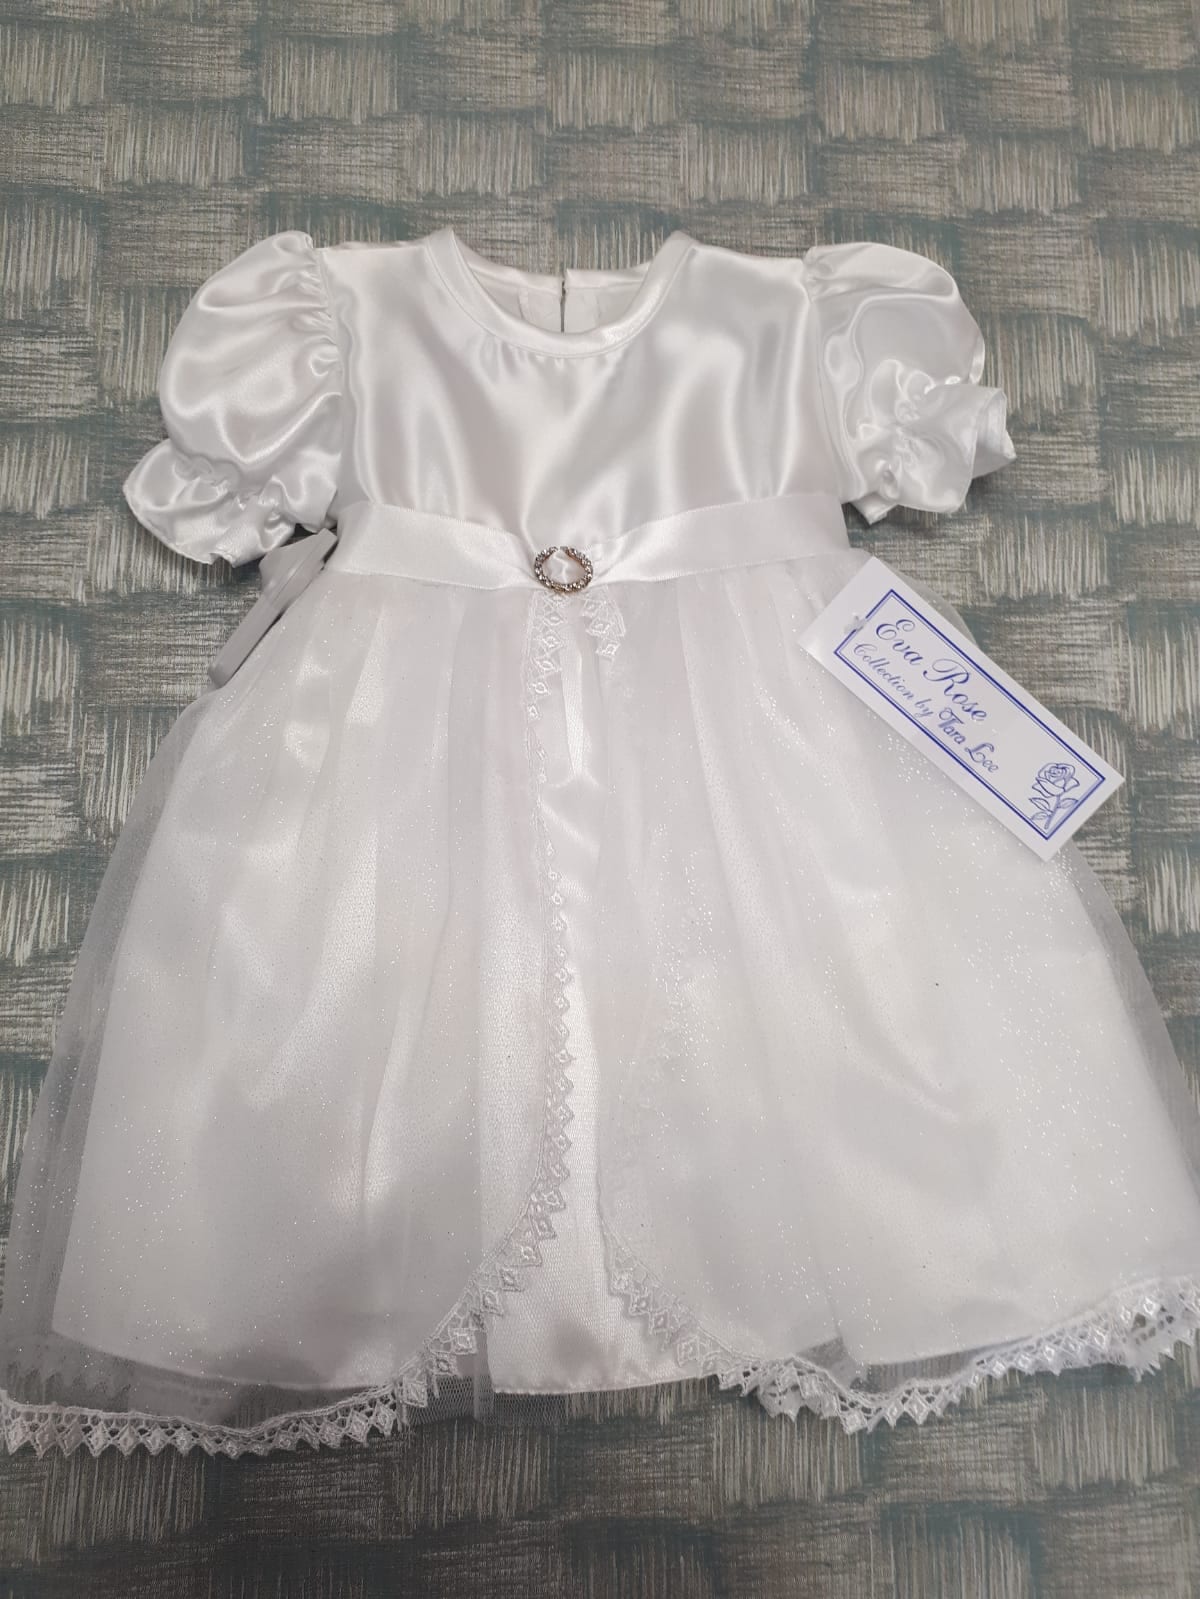 Designer Christening Gowns - Blinging Up Baby by Lady Bling & Baby Bling  Bling​